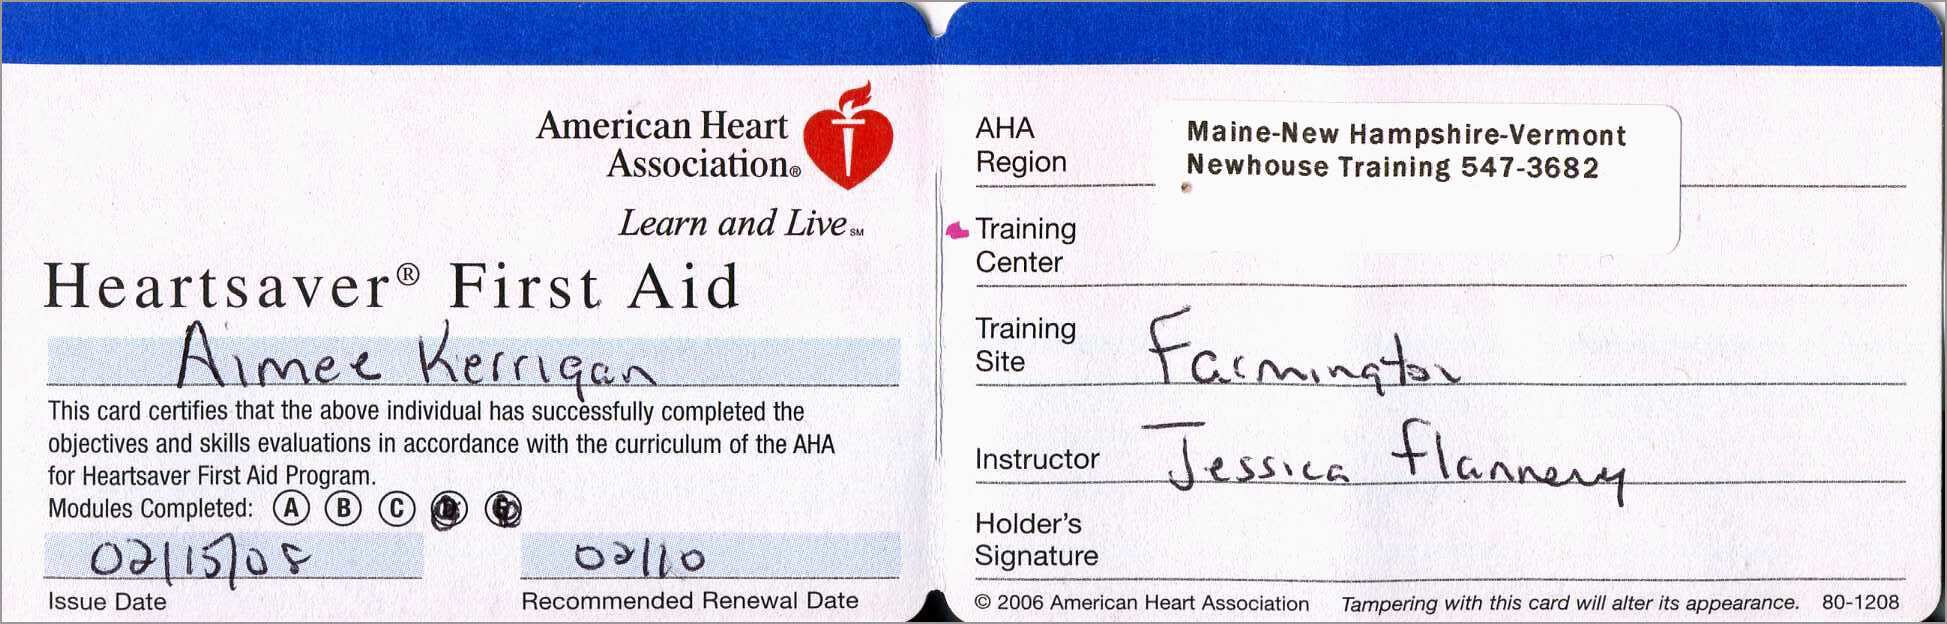 7670Ee Cpr Card Template | Wiring Resources With Regard To Cpr Card Template